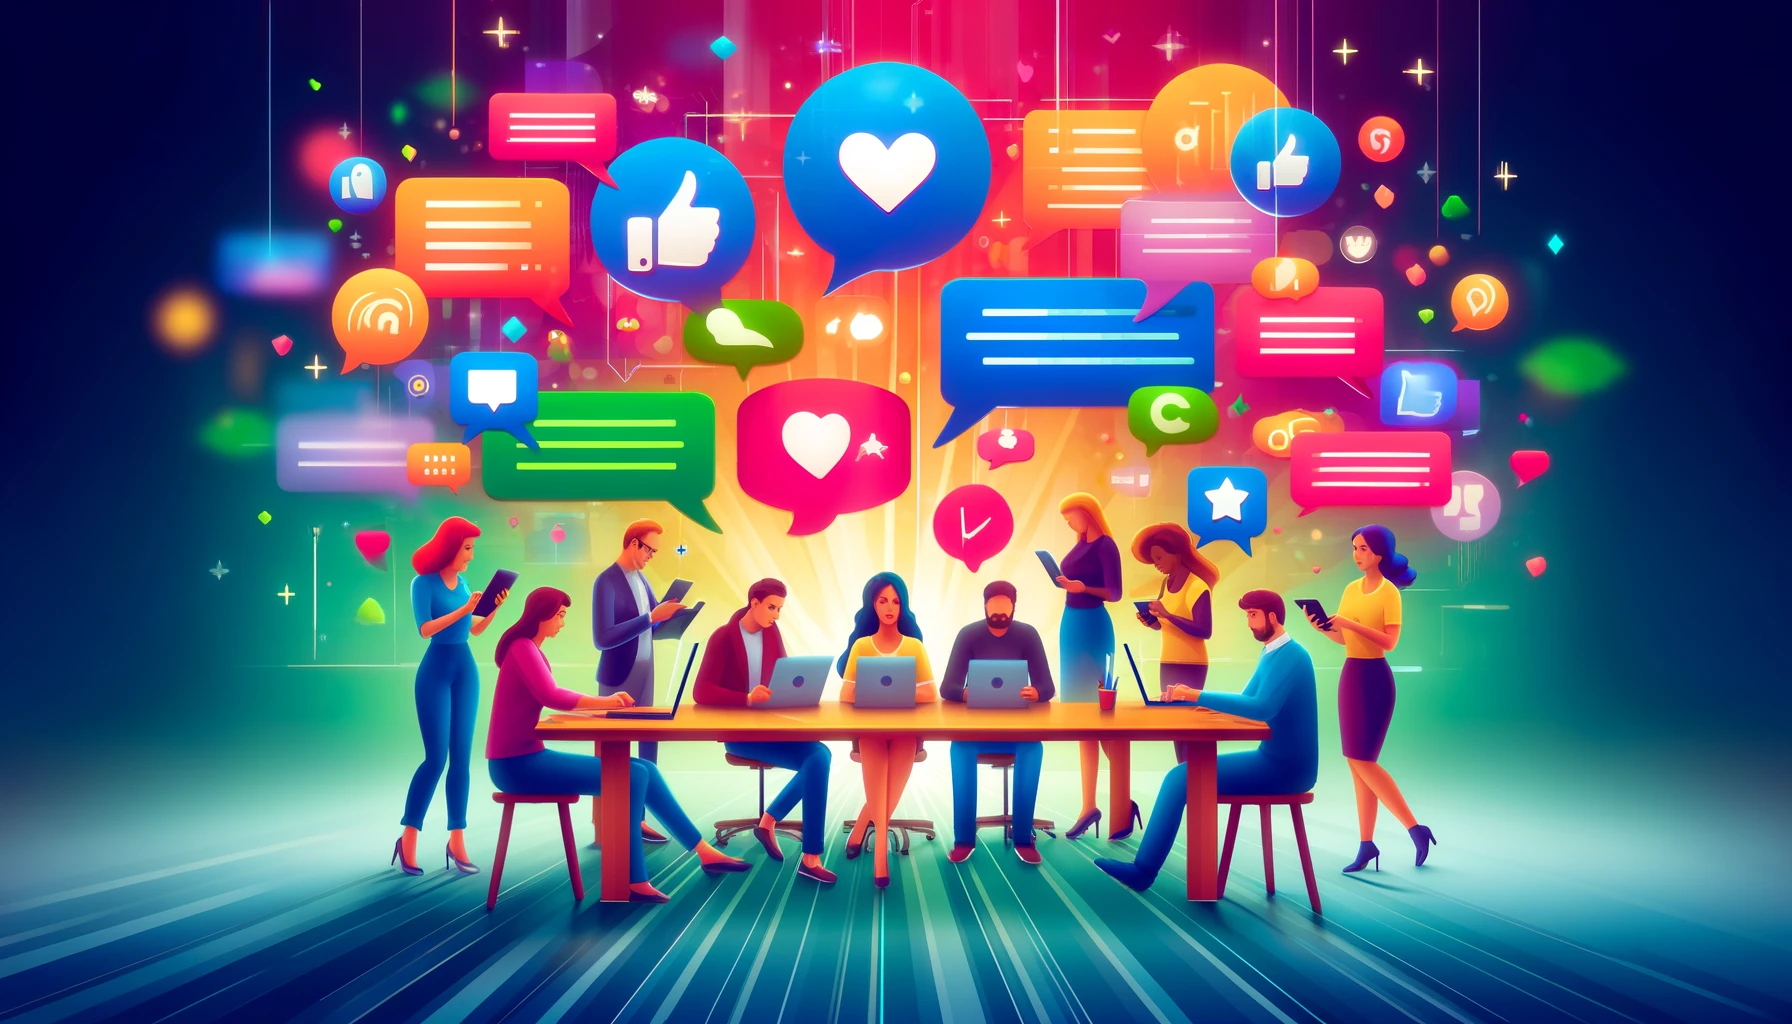 A vibrant illustration of a small business team engaging in lively conversations with community members online. The team is gathered around a table with laptops and smartphones, responding to comments and messages in a colorful digital space filled with speech bubbles, likes, and comments symbols, representing active engagement and community-driven branding.